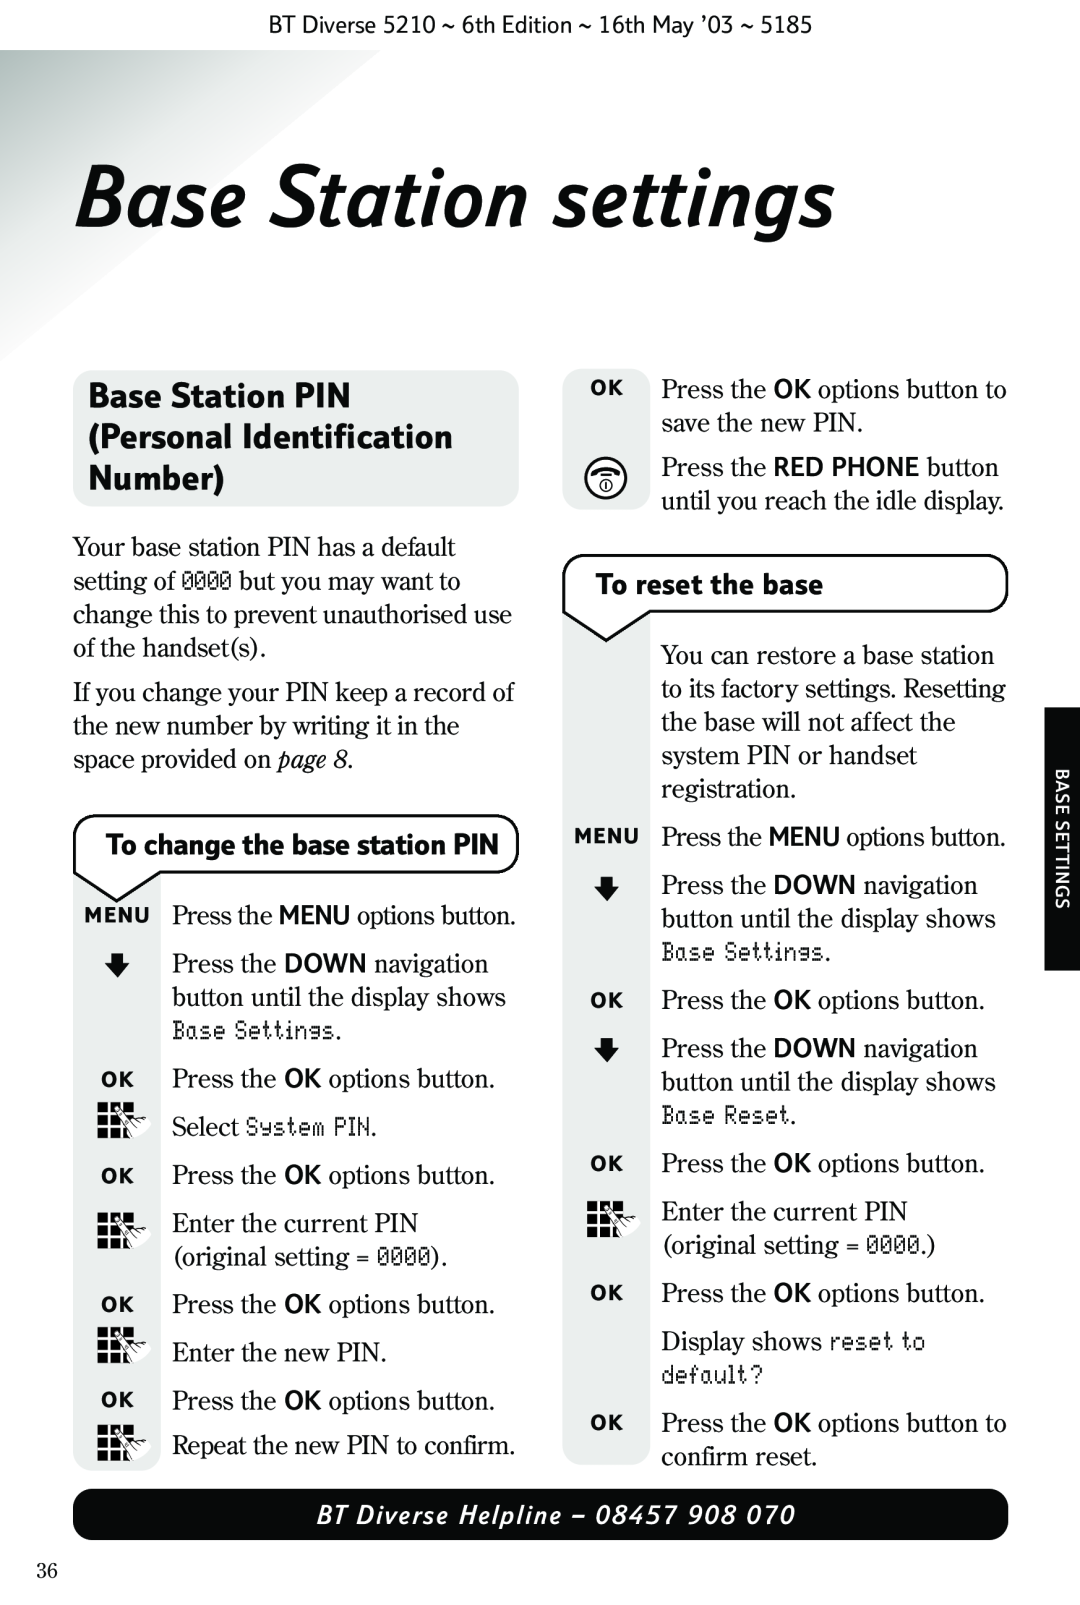 BT 5210 Base Station settings, Base Station PIN Personal Identification Number, To change the base station PIN, default? 